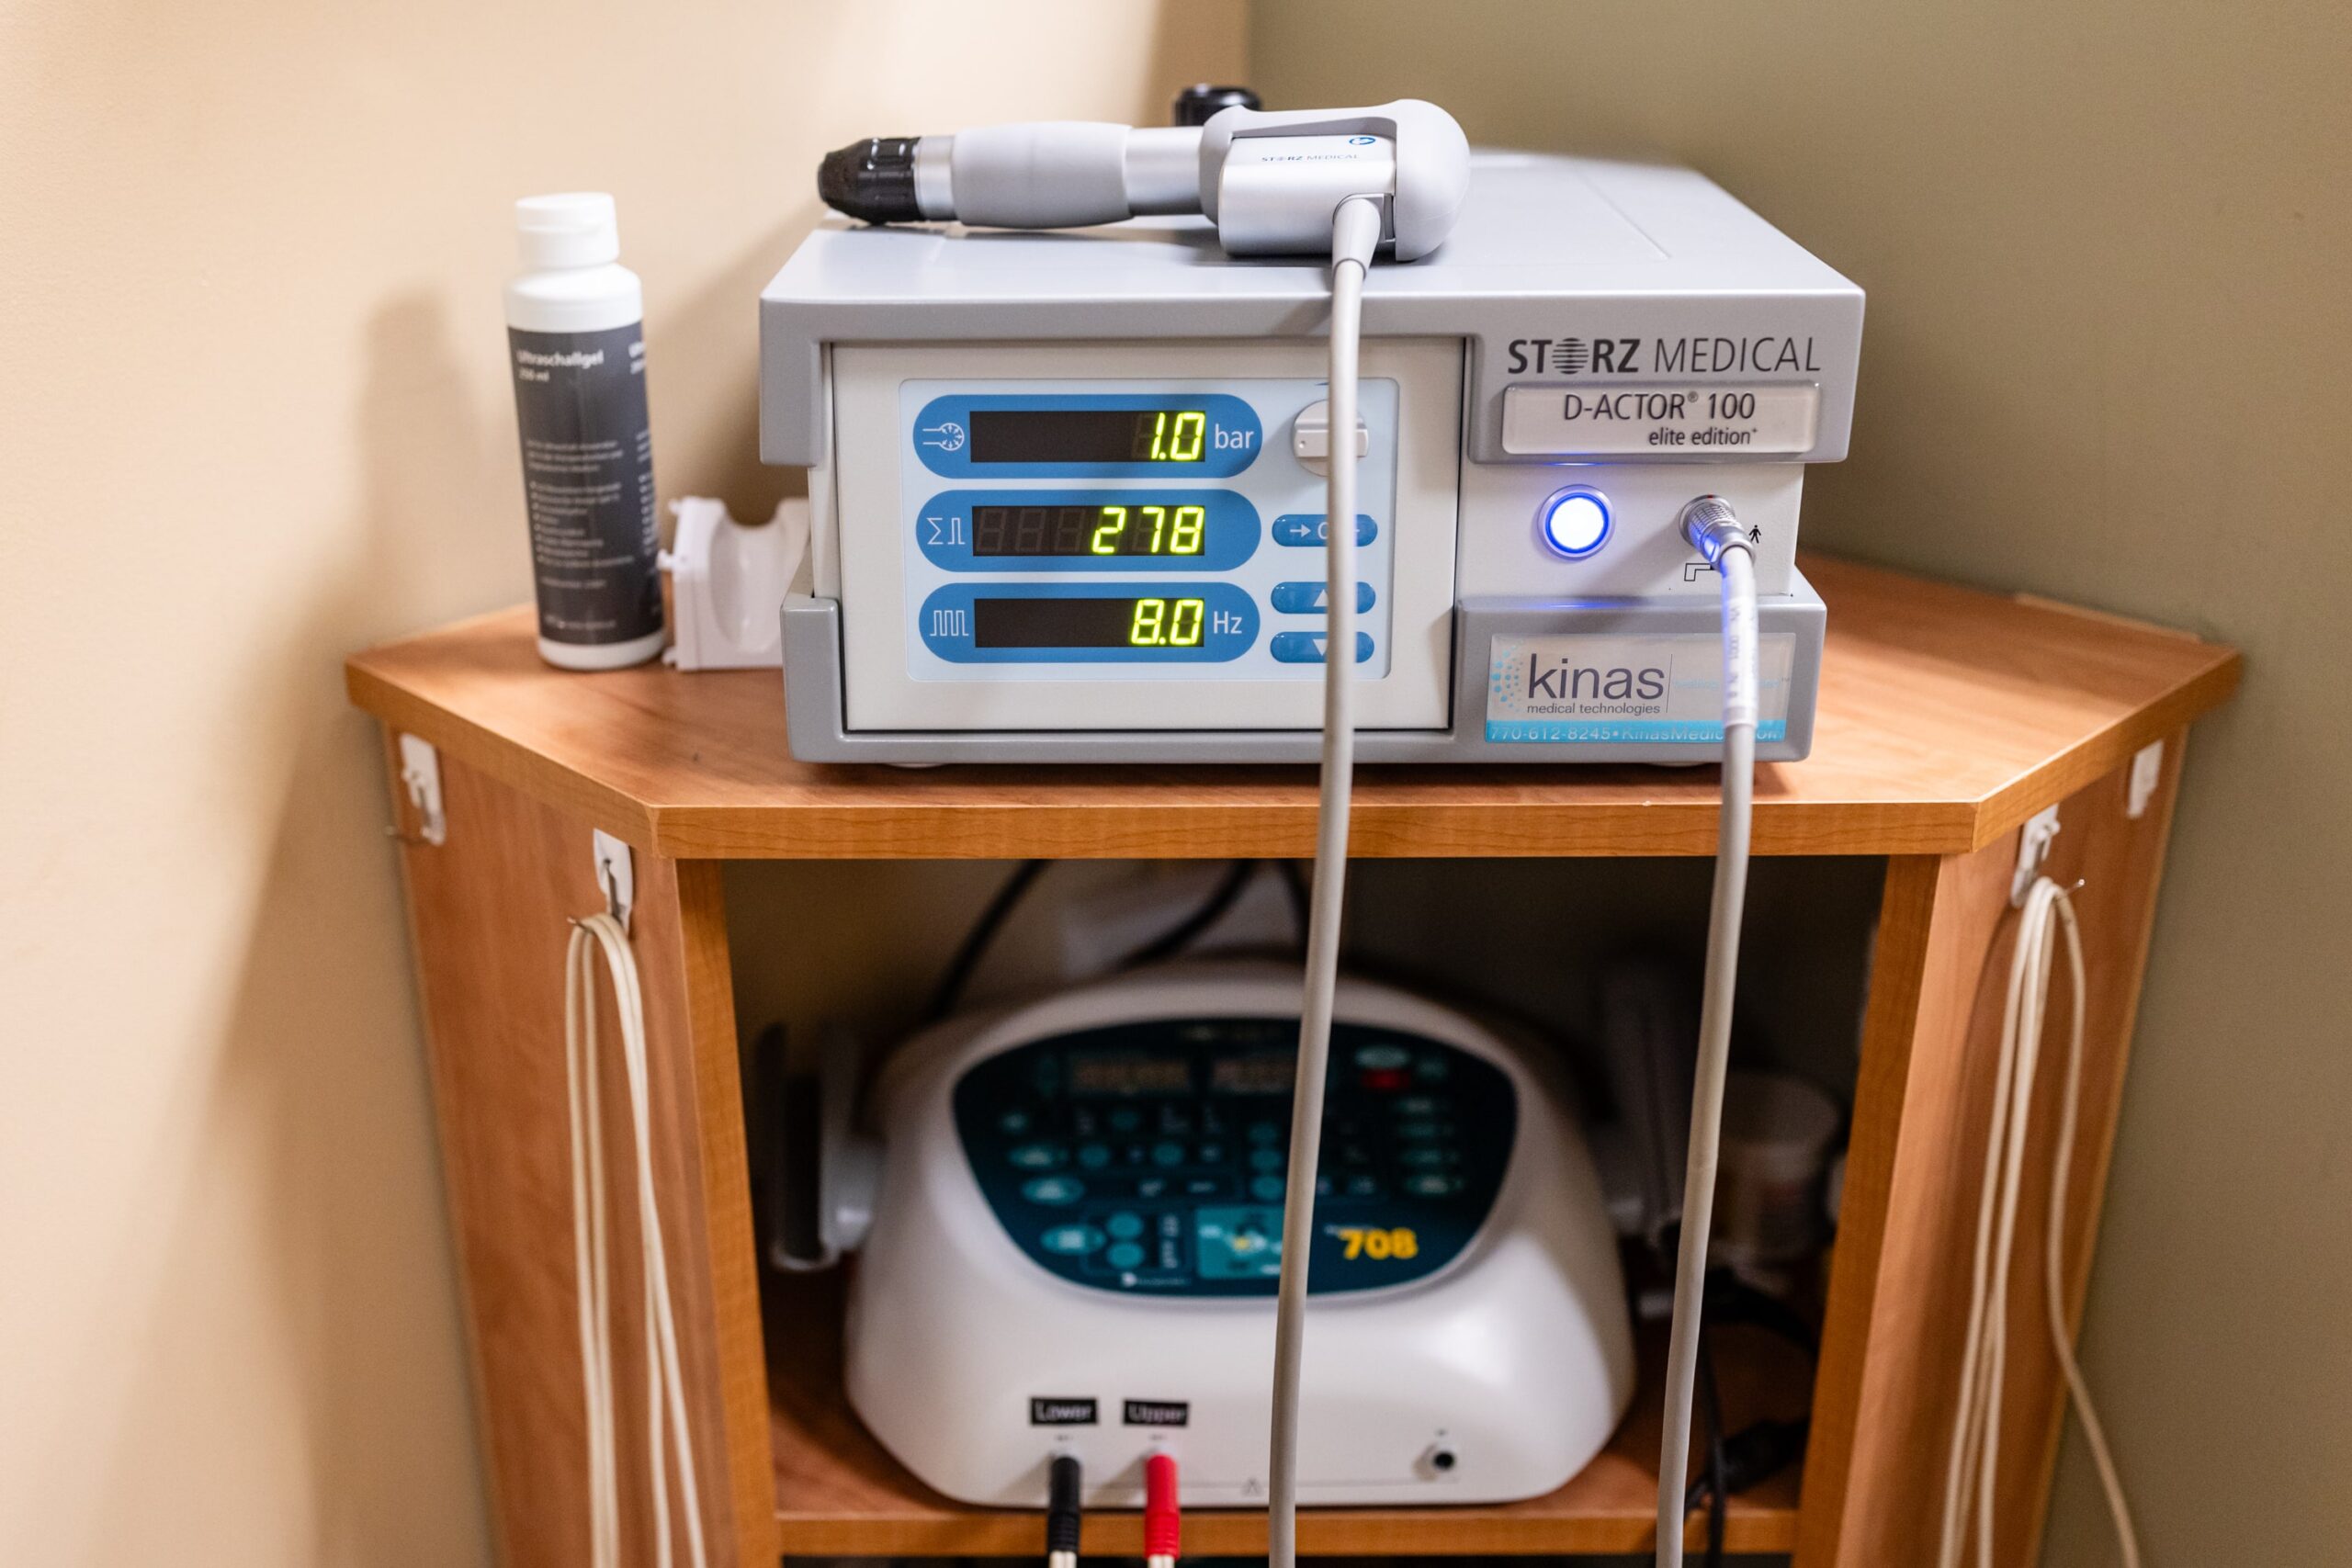 Medical therapy devices on a wooden cabinet in a clinical setting.